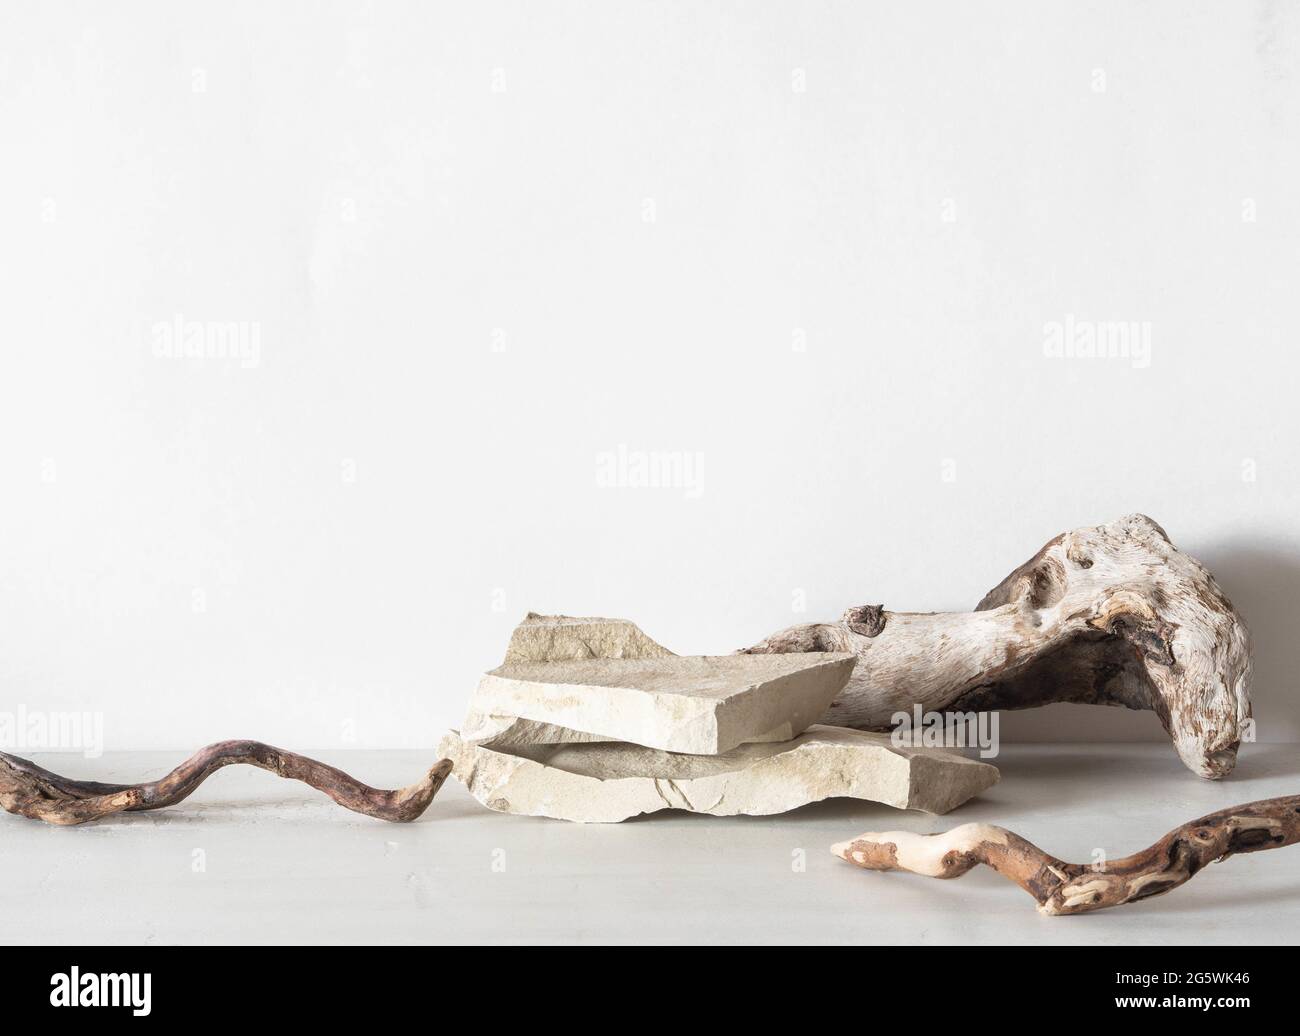 driftwood background.Driftwood sticks, white starfish and white fishing net  on beige cream background.Natural wood decor in a nautical style.Summer  Stock Photo - Alamy